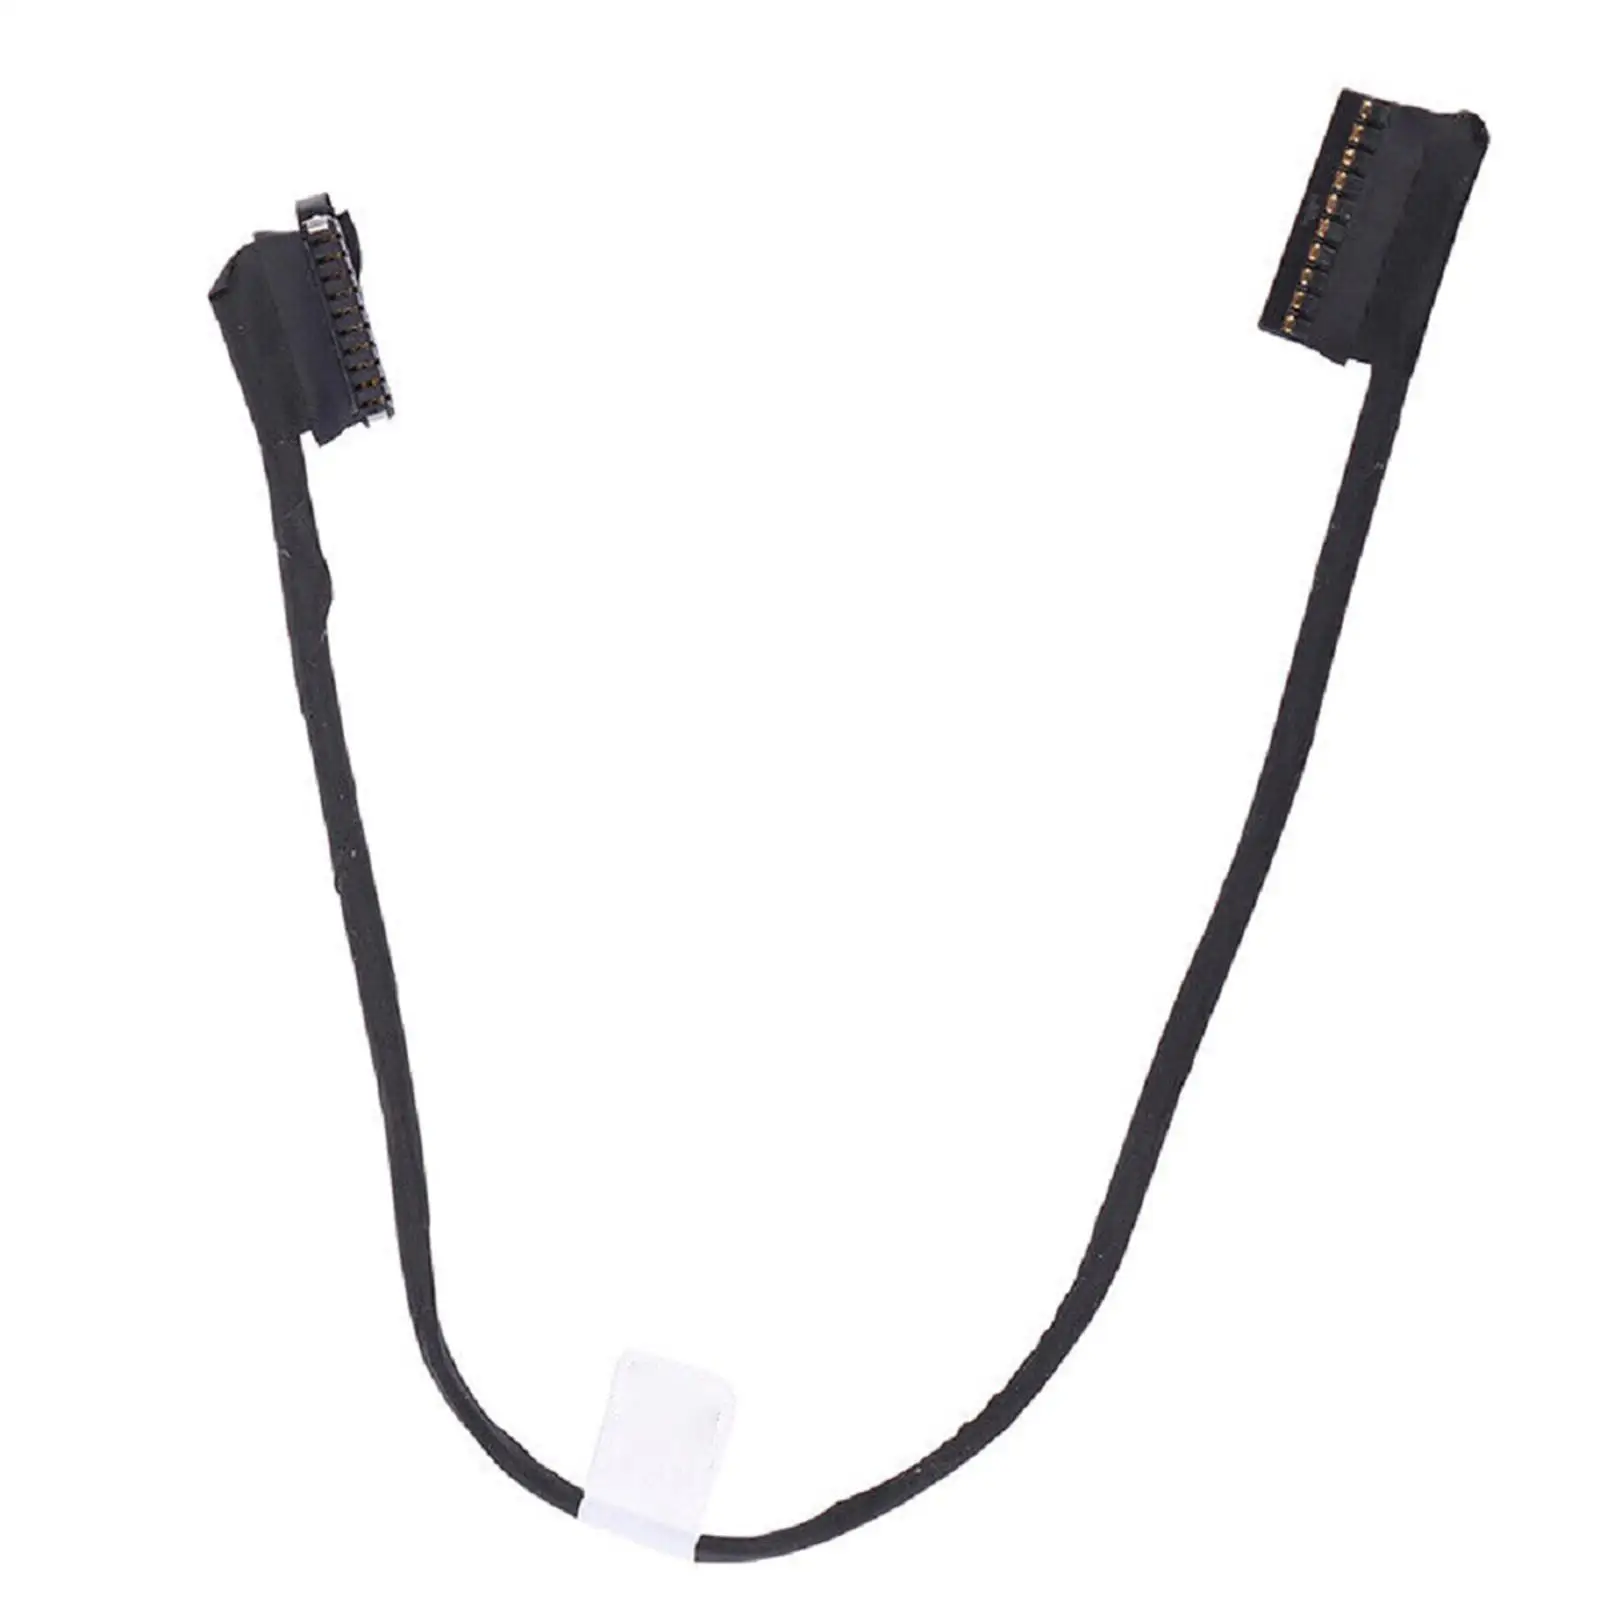 Laptop Battery Cable Cord, Durable, Replacement for Dell M3520 3530 CDM80 Part Accessory